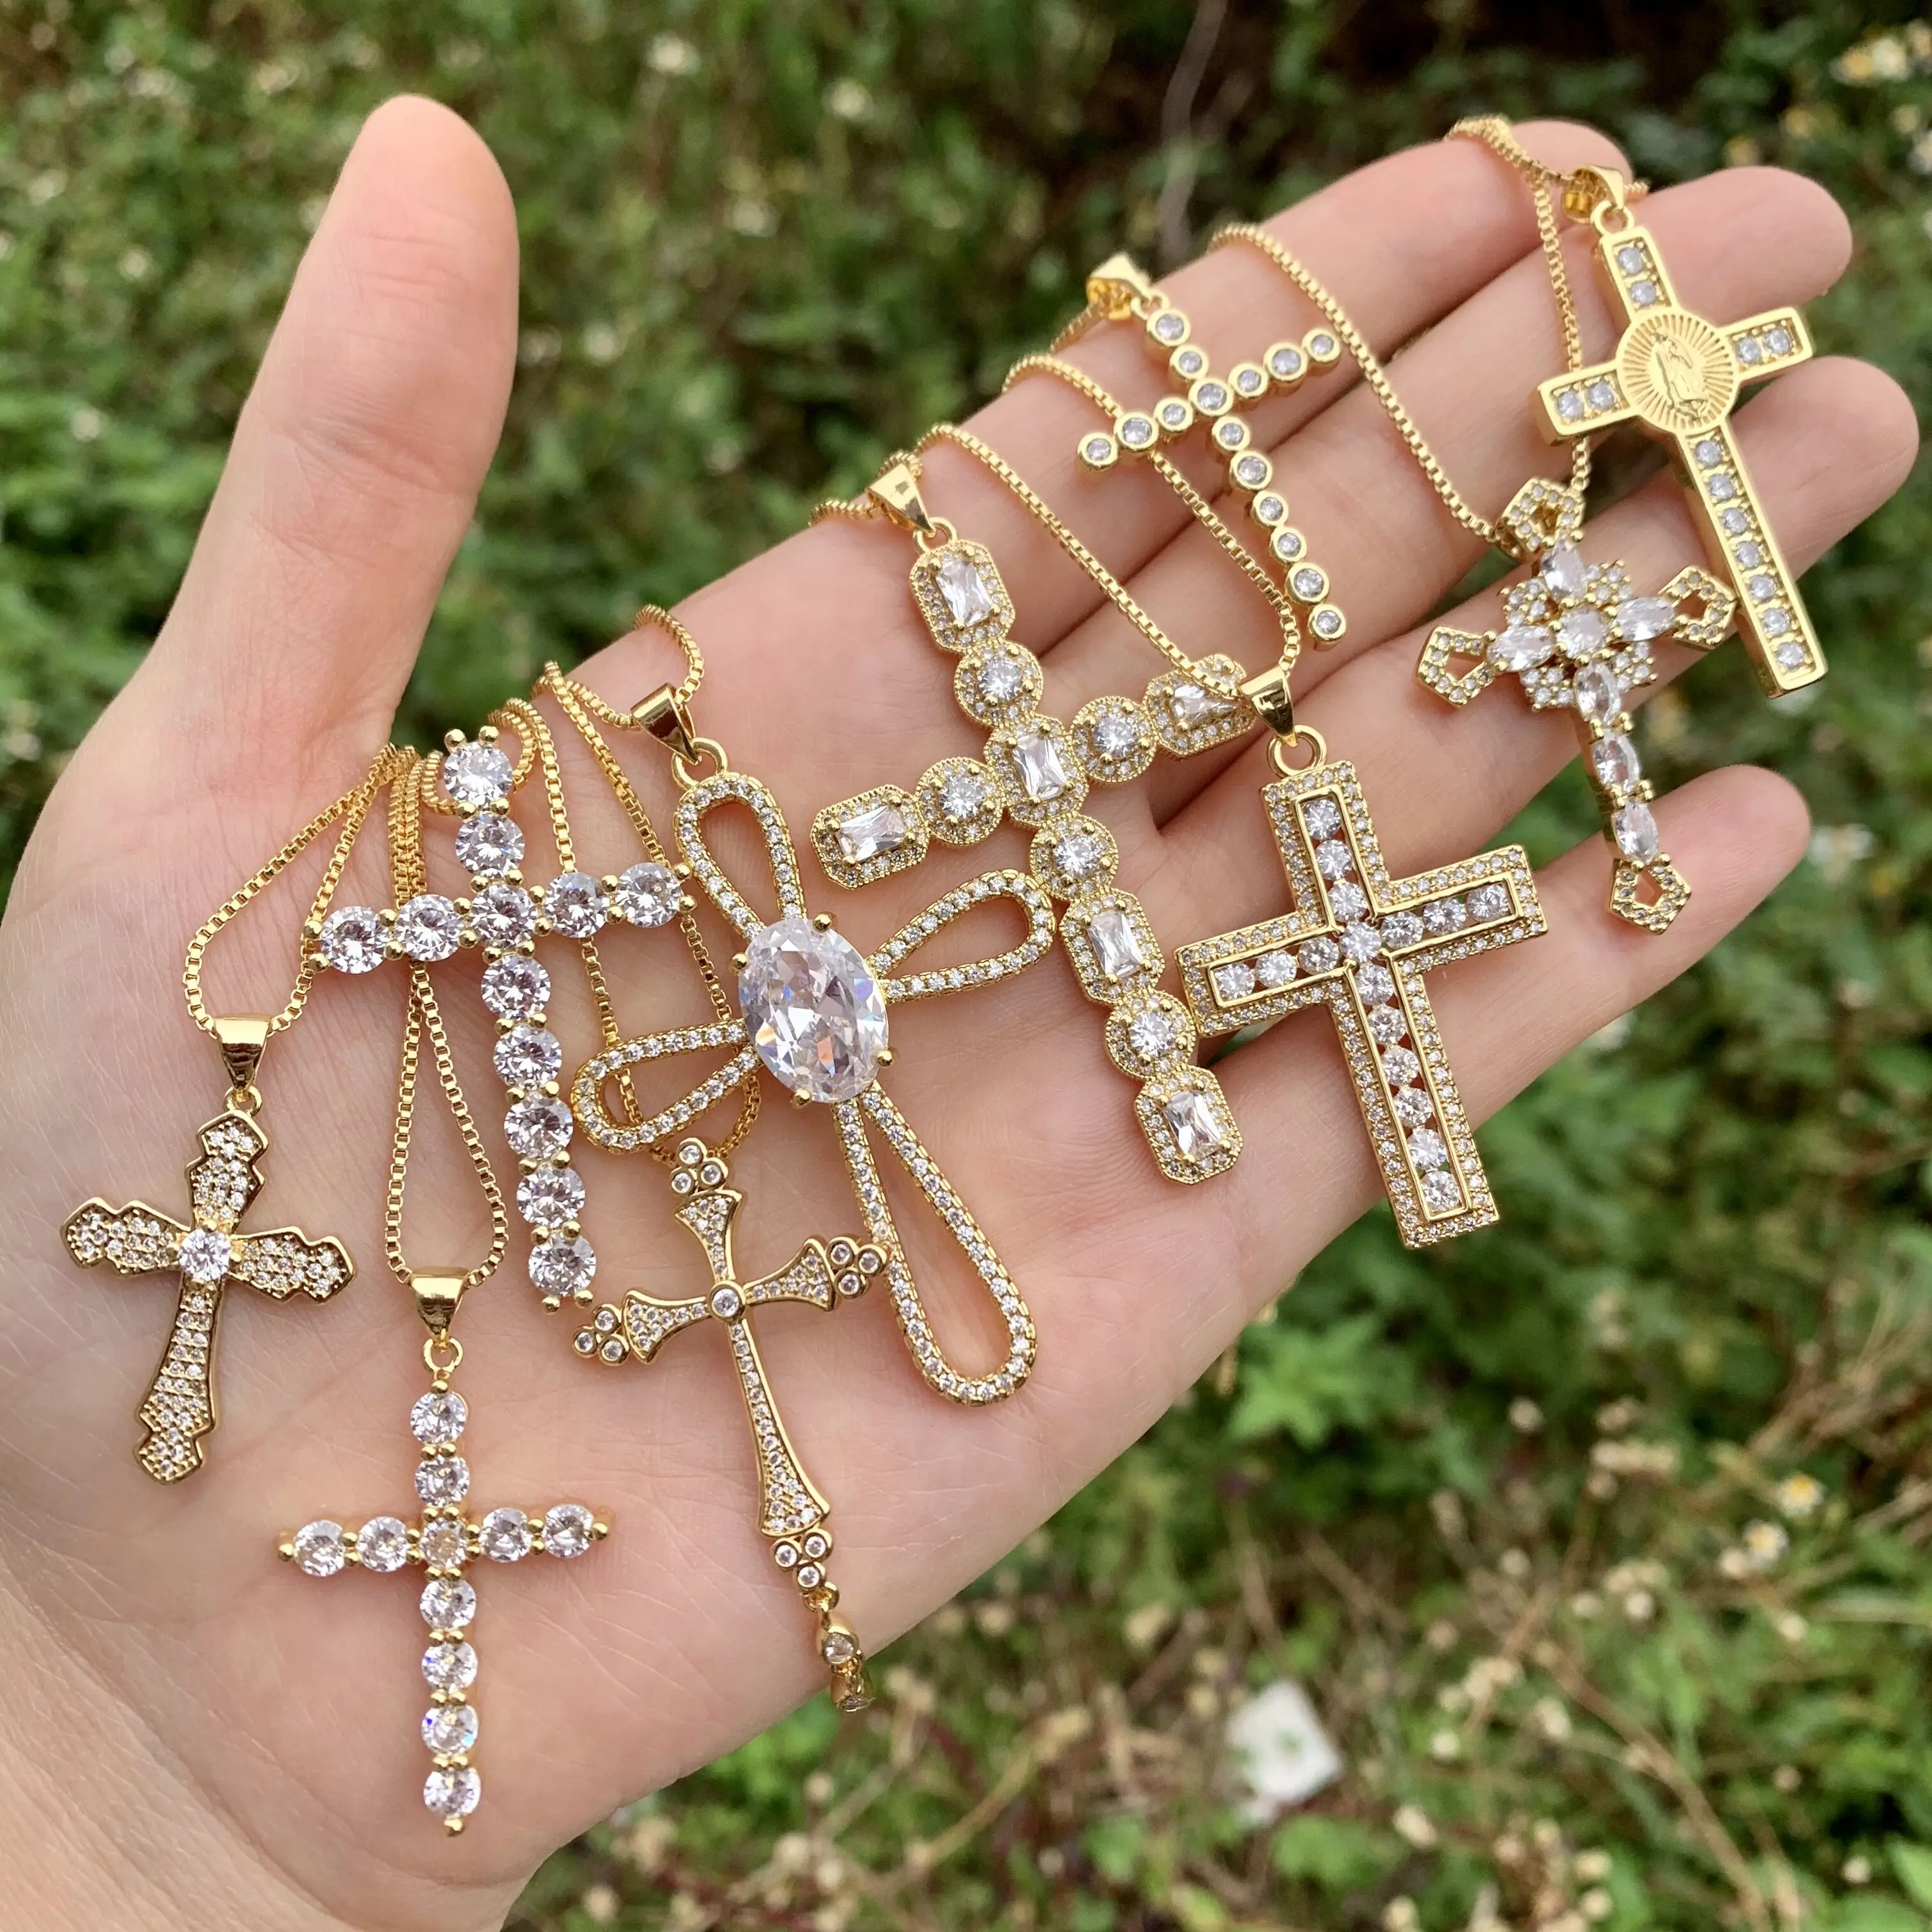 

LS-B1824 Gold Cross shaped pendant necklace amazing cz micro pave necklace cross necklace women men jewelry, As is